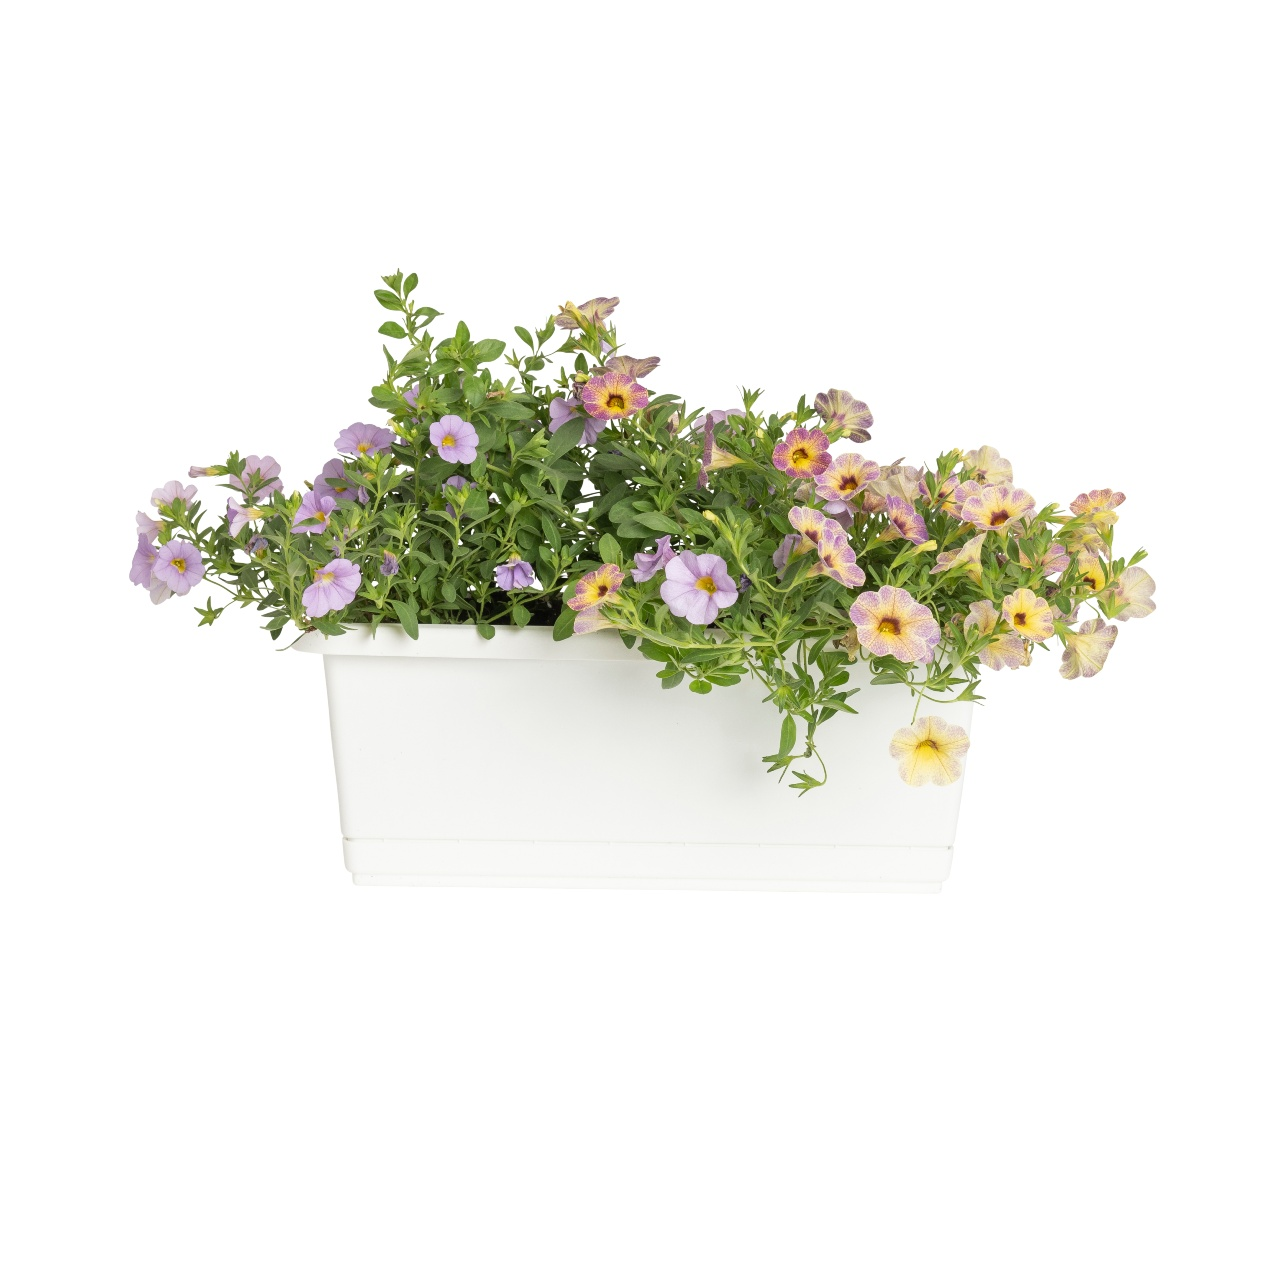 Various flowers in a white windowsill planter